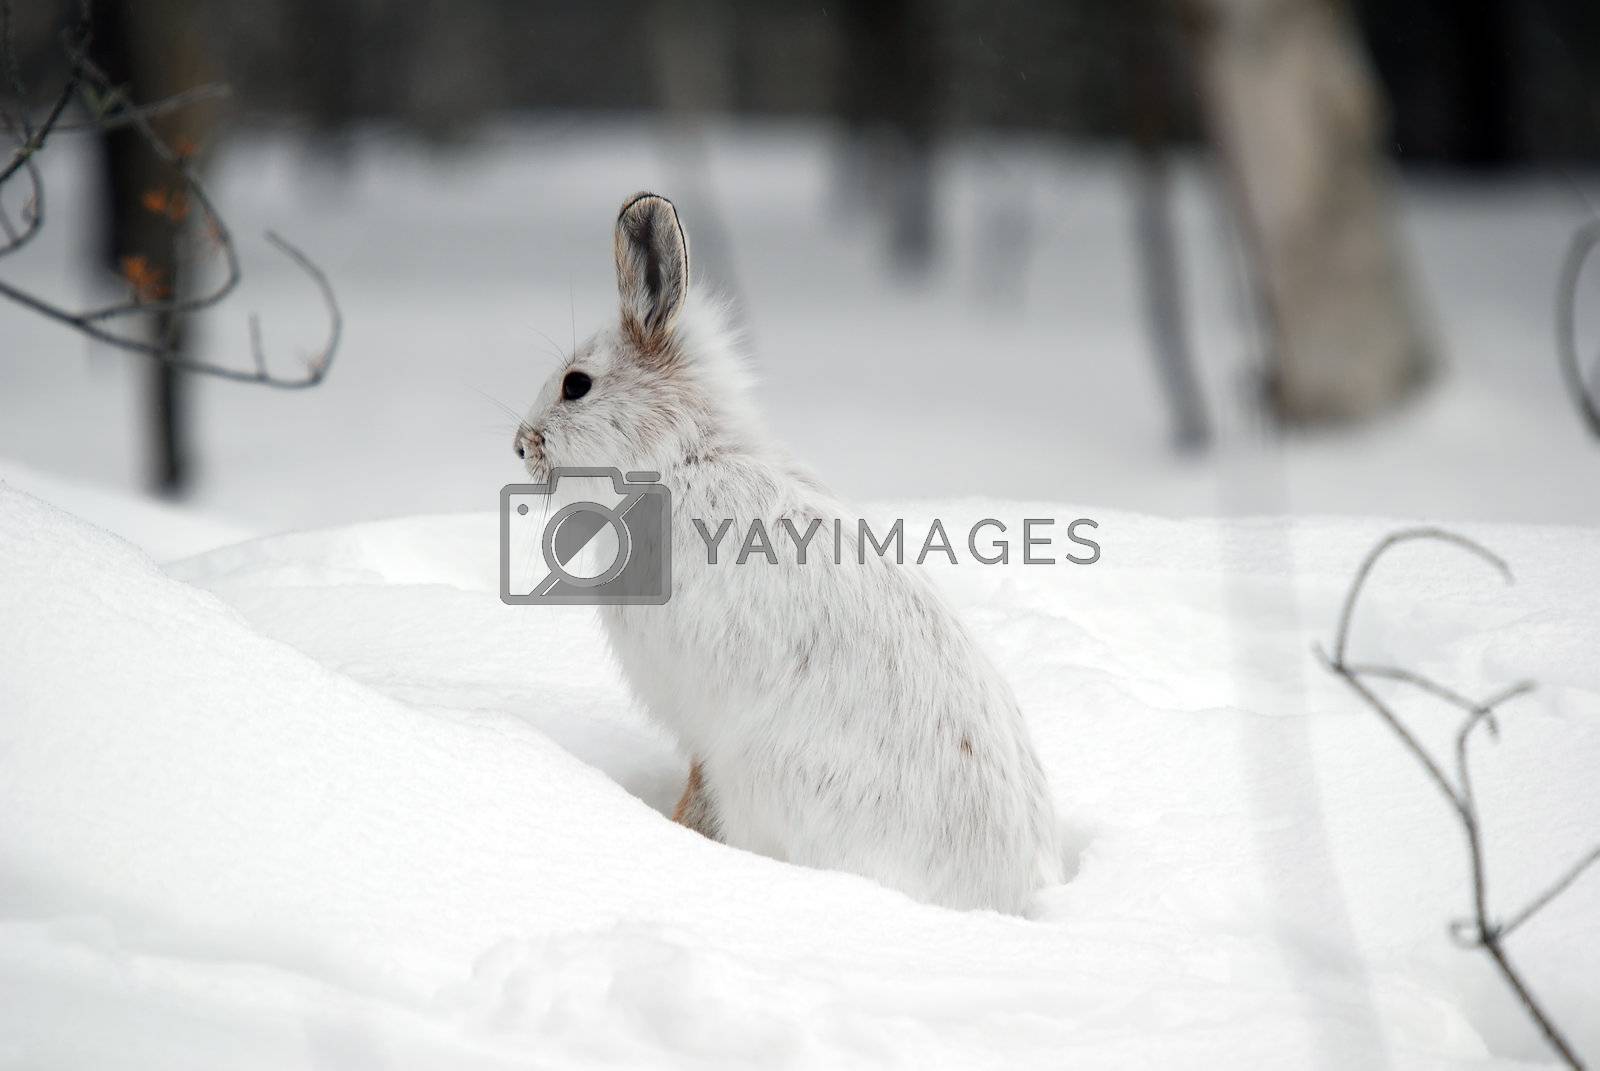 Royalty free image of Snowshoe Hare by nialat